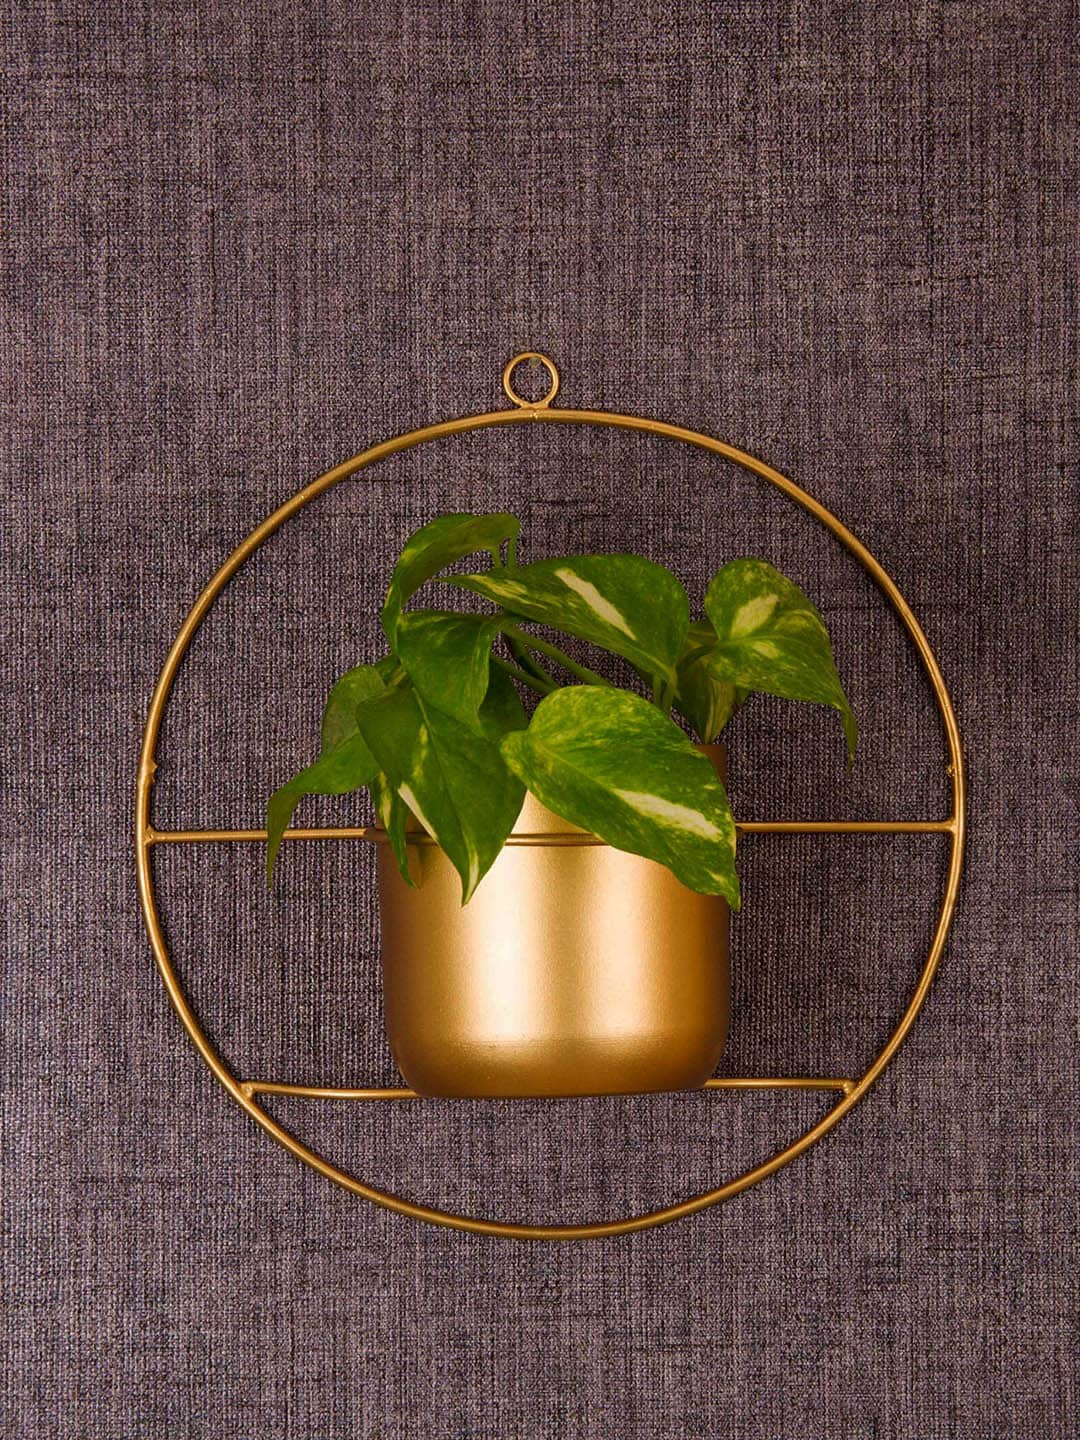 TIED RIBBONS Gold-Toned Solid Metal Wall Mounted Planter